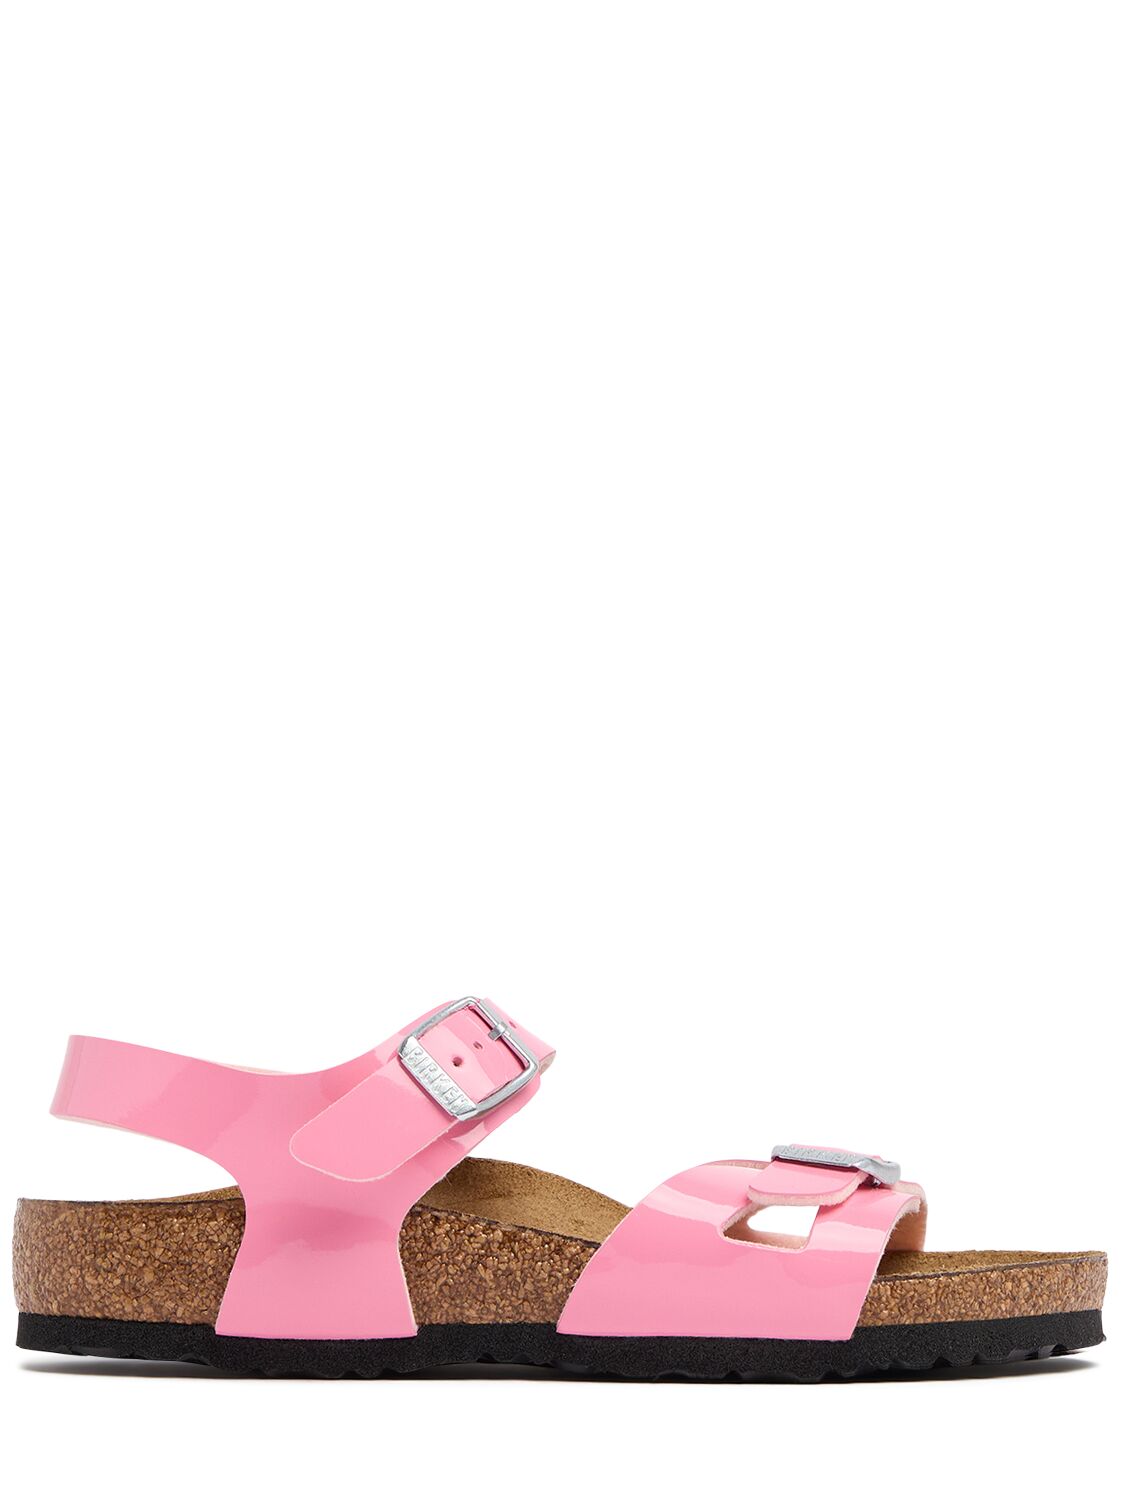 Birkenstock Patent Rio Faux Leather Sandals In Pink